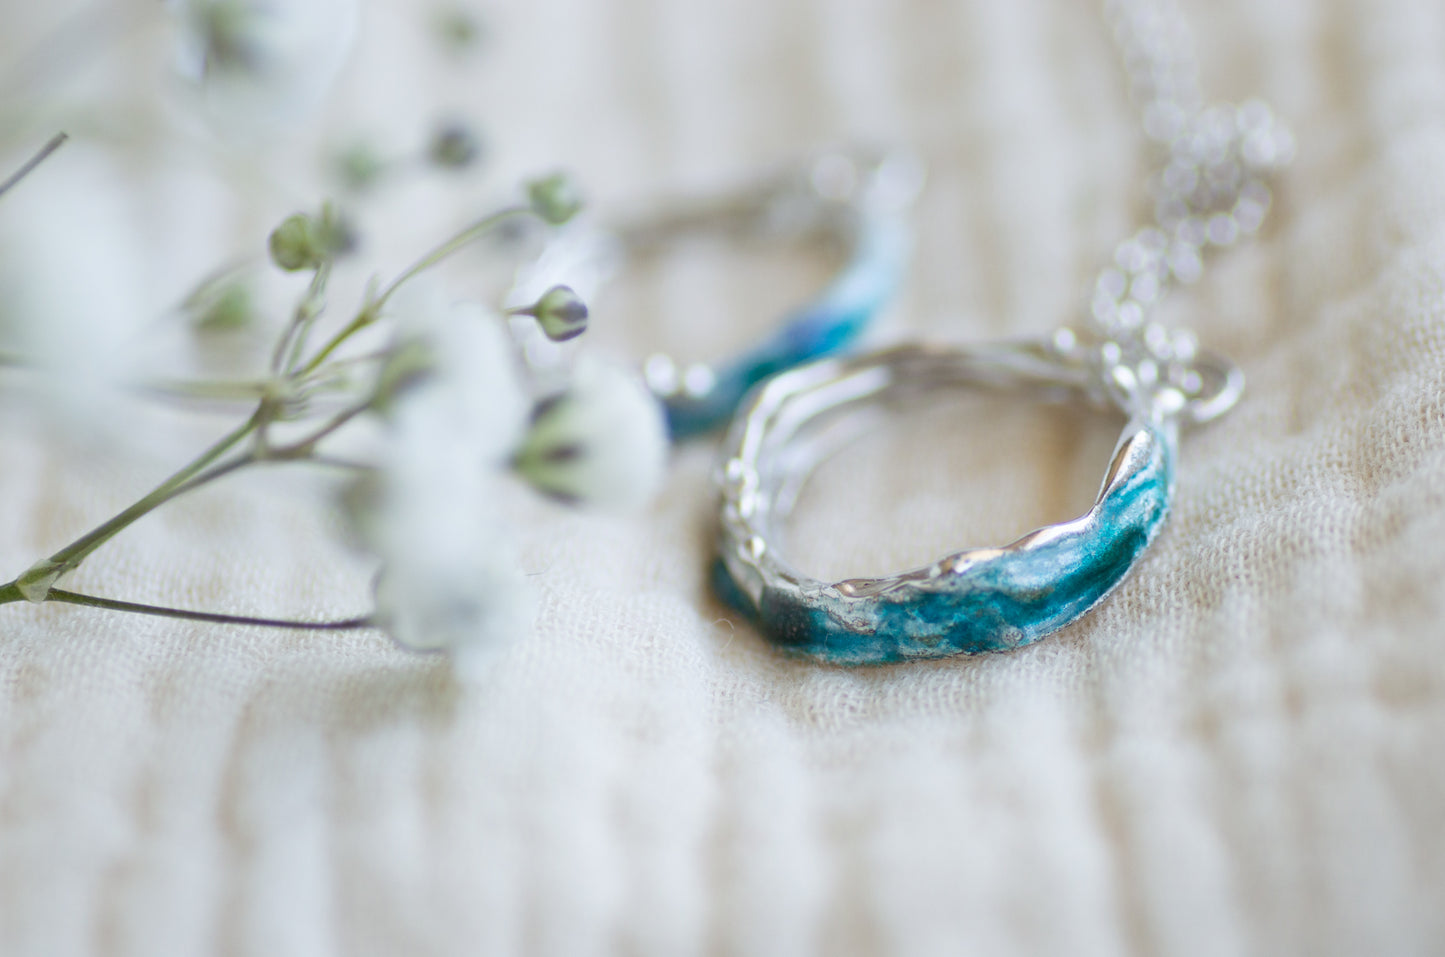 'River Tides' Necklace with Enamel